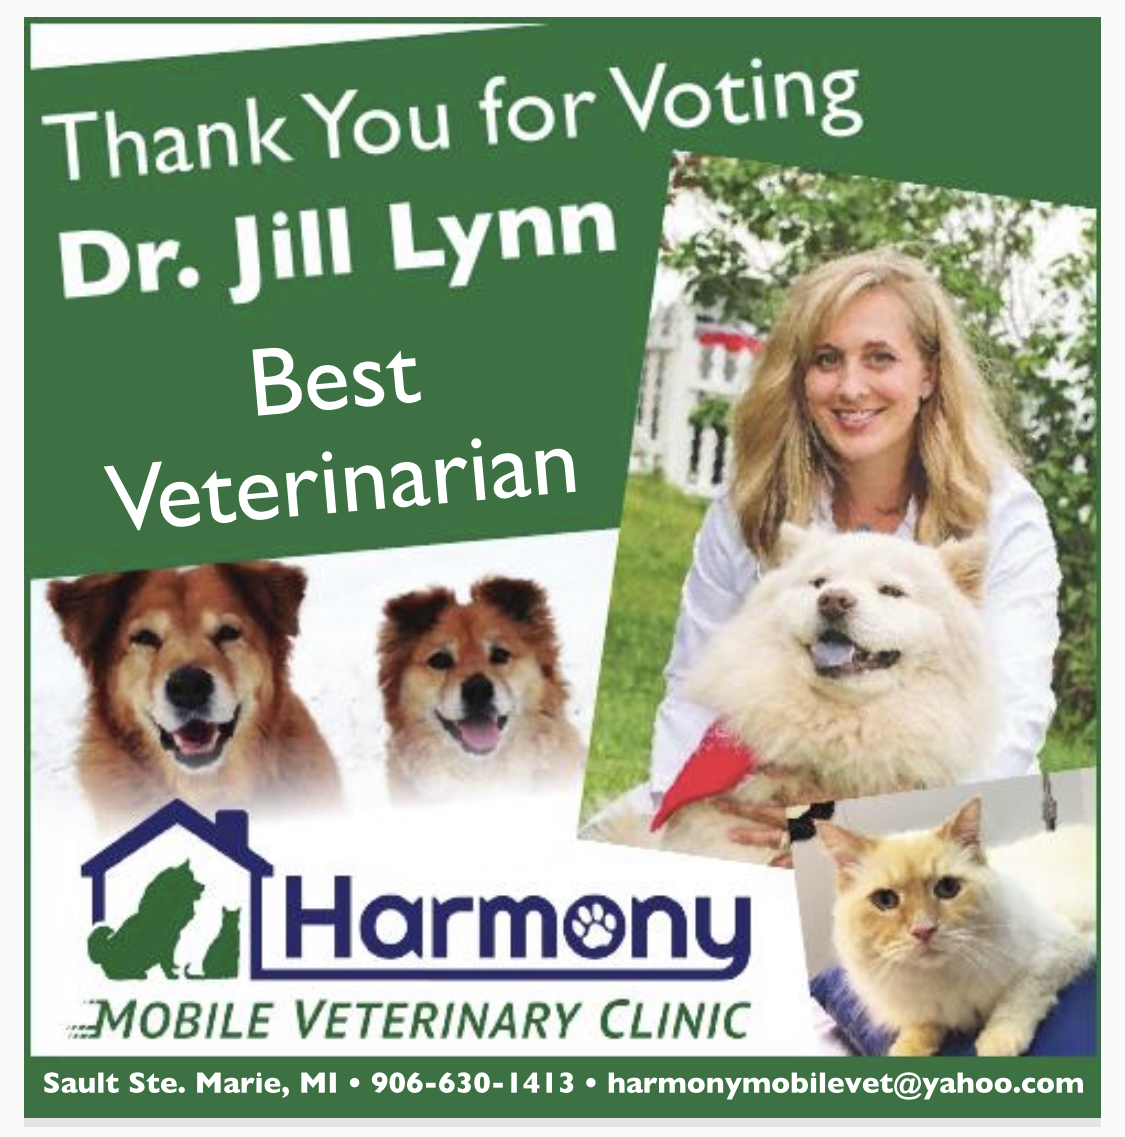 About Harmony MobileVeterinary Clinic 